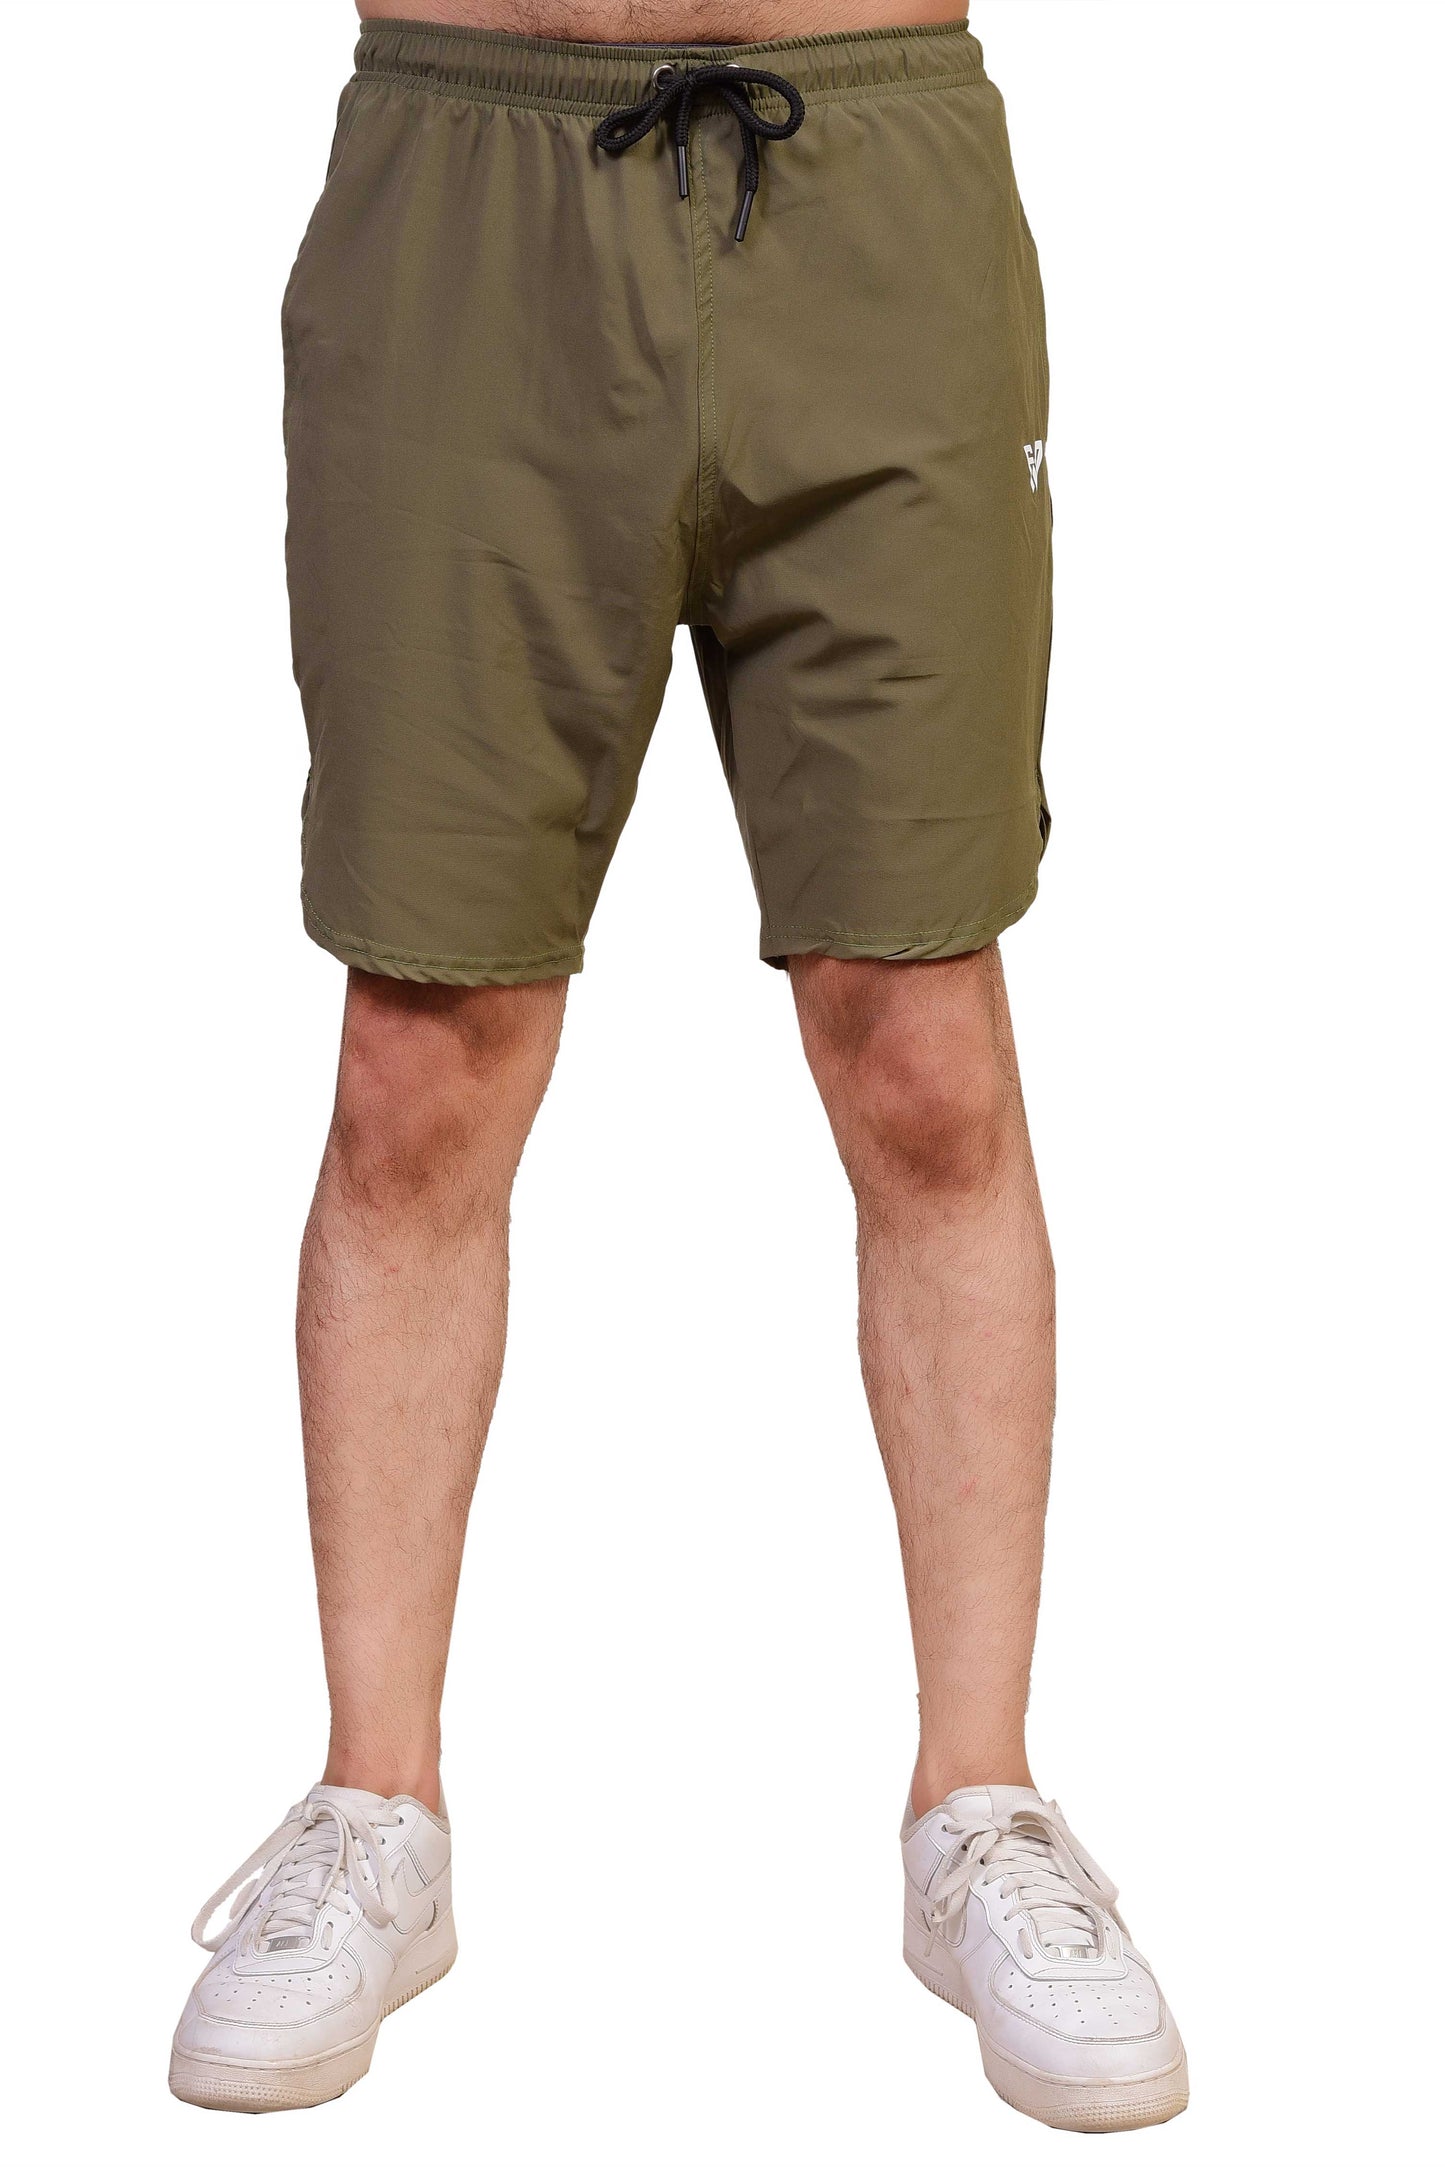 Fitness Welt Athletic Shorts Olive Green